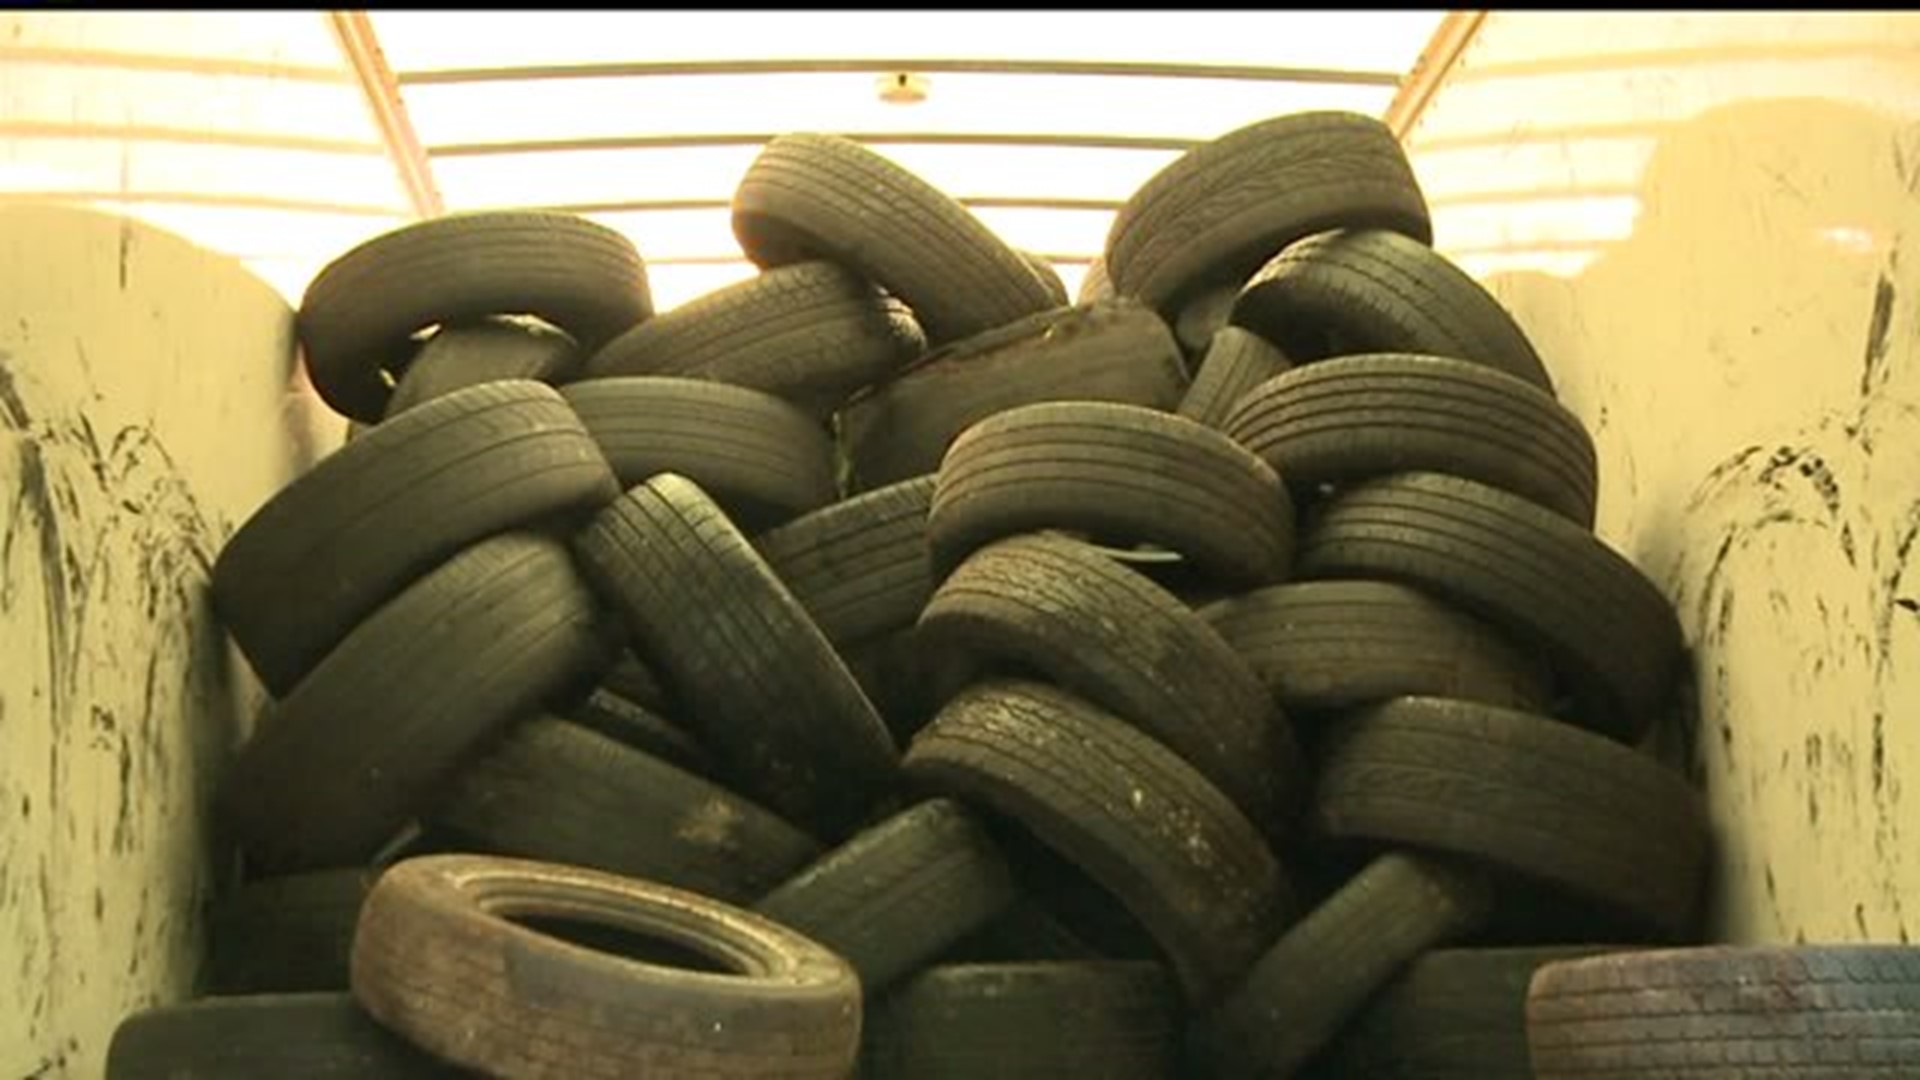 Volunteers remove tires illegally dumped at animal shelter